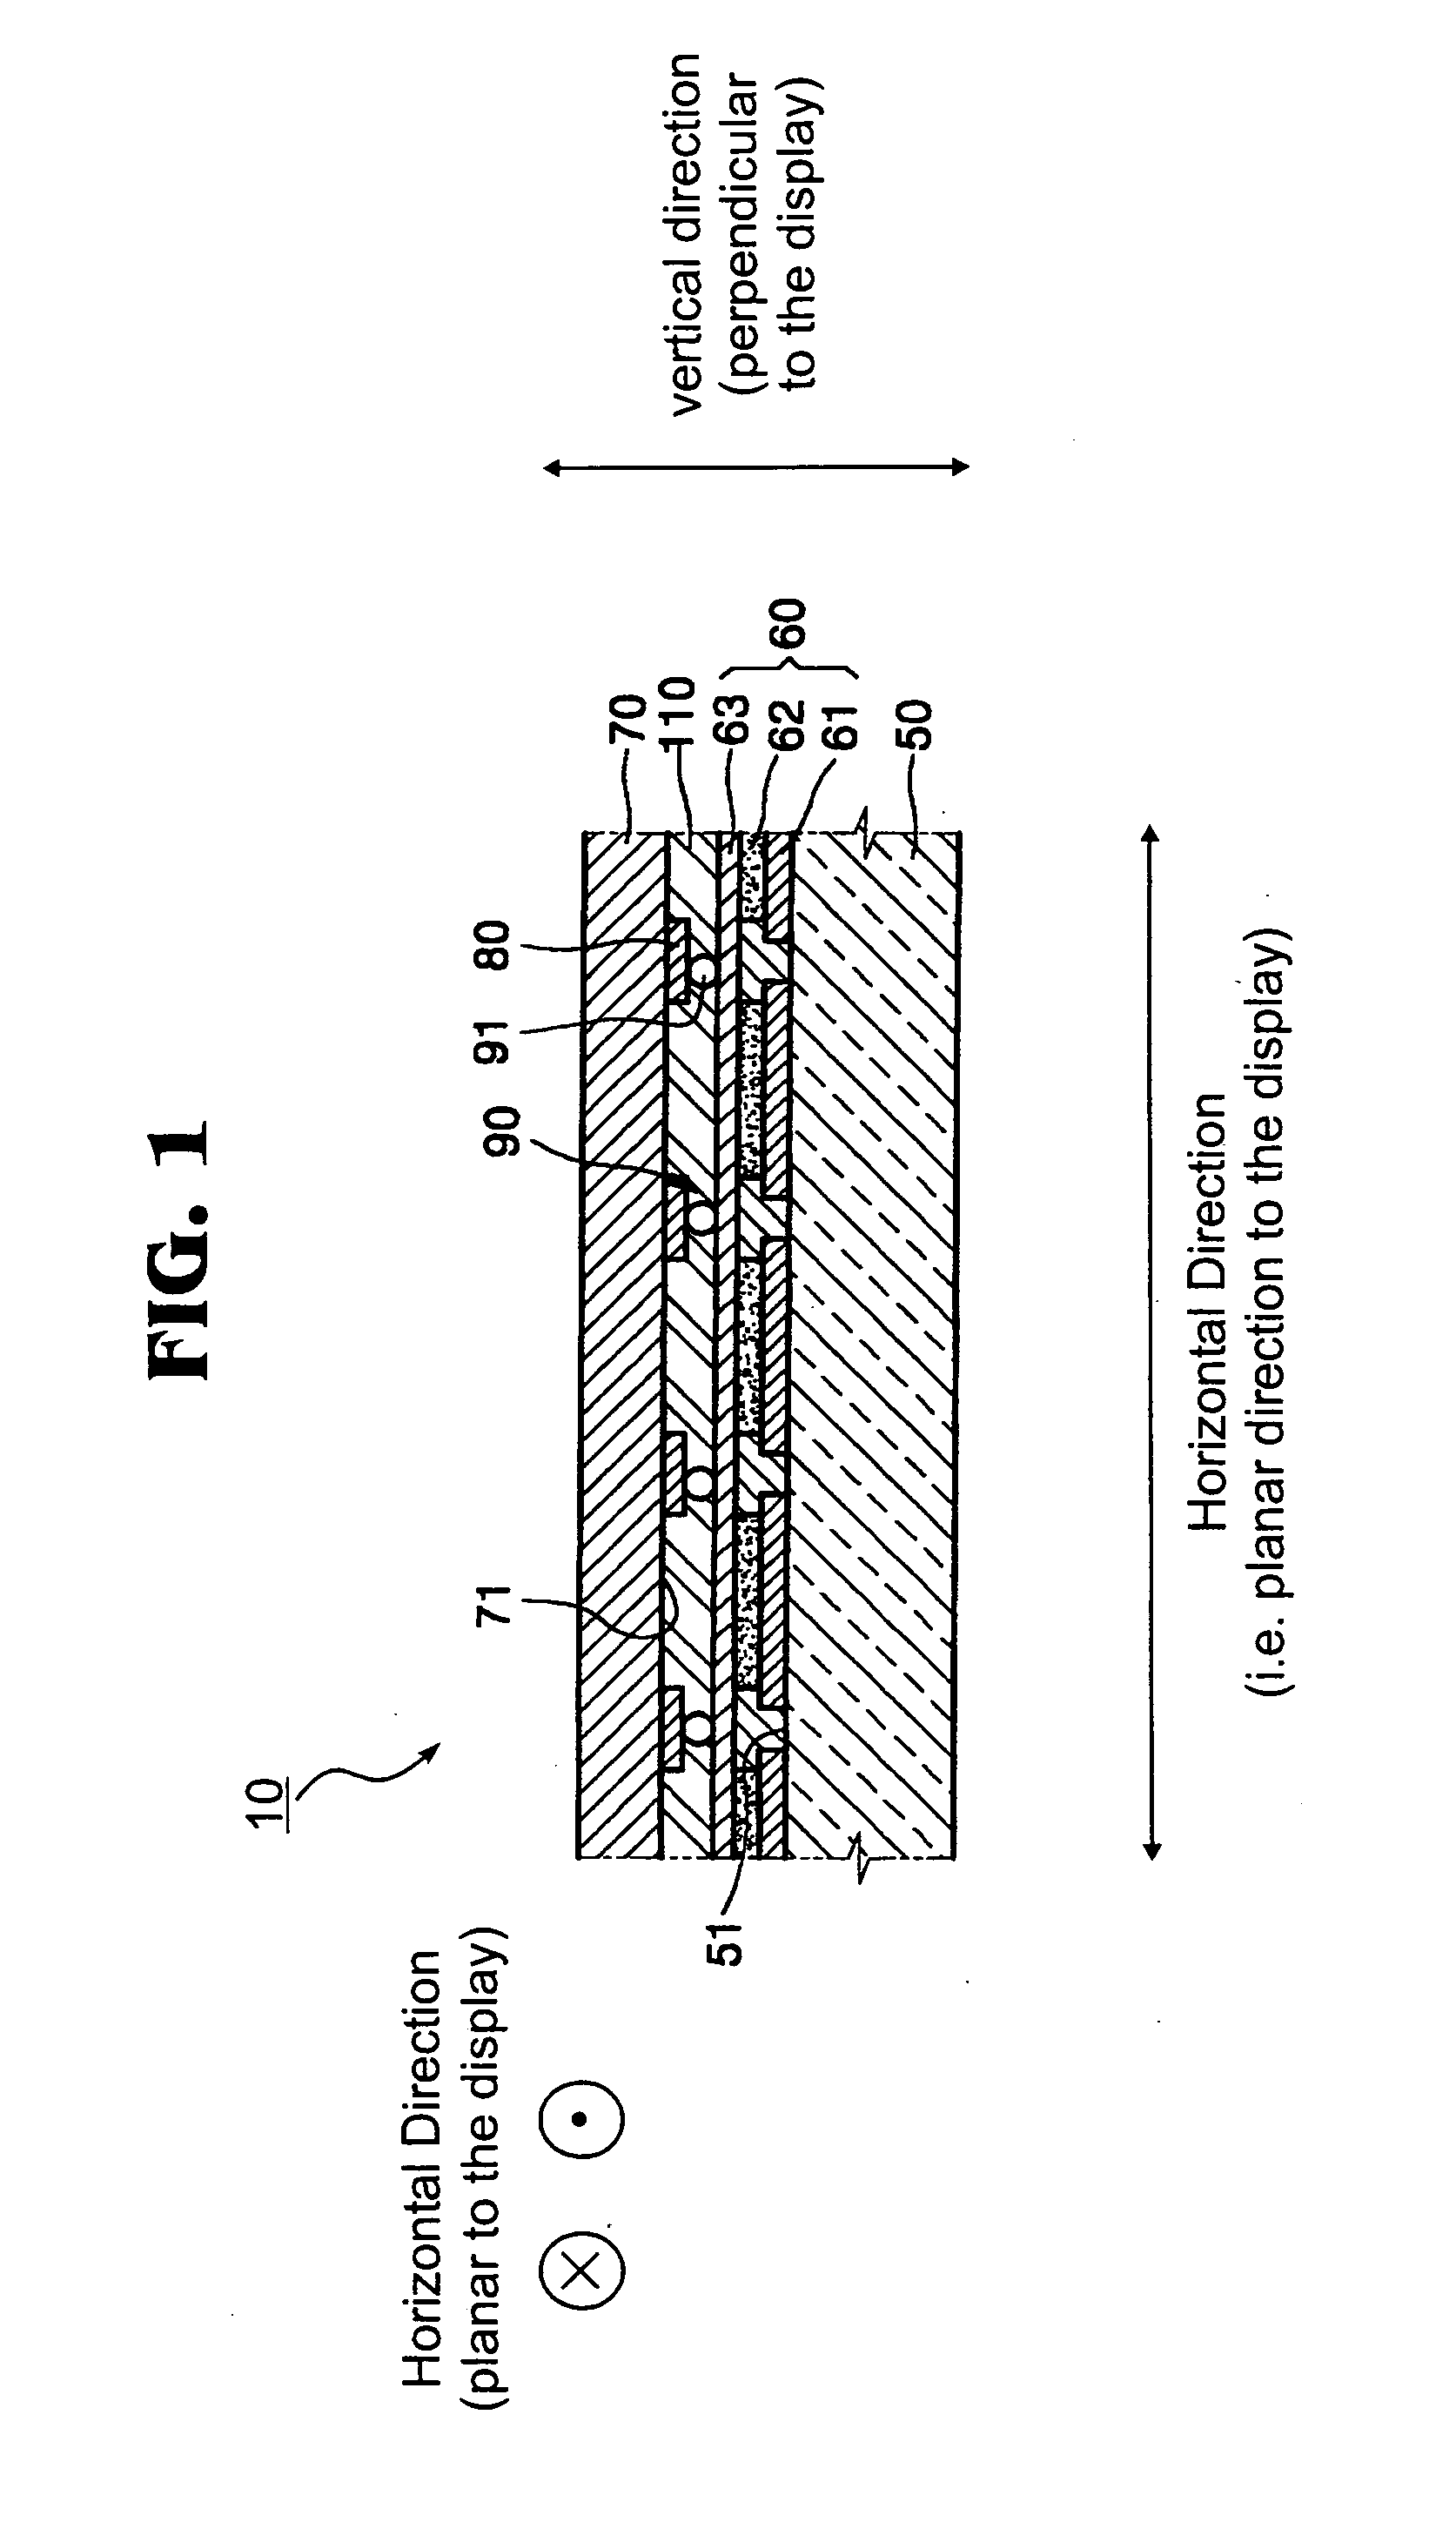 Electrical conductors in an electroluminescent display device